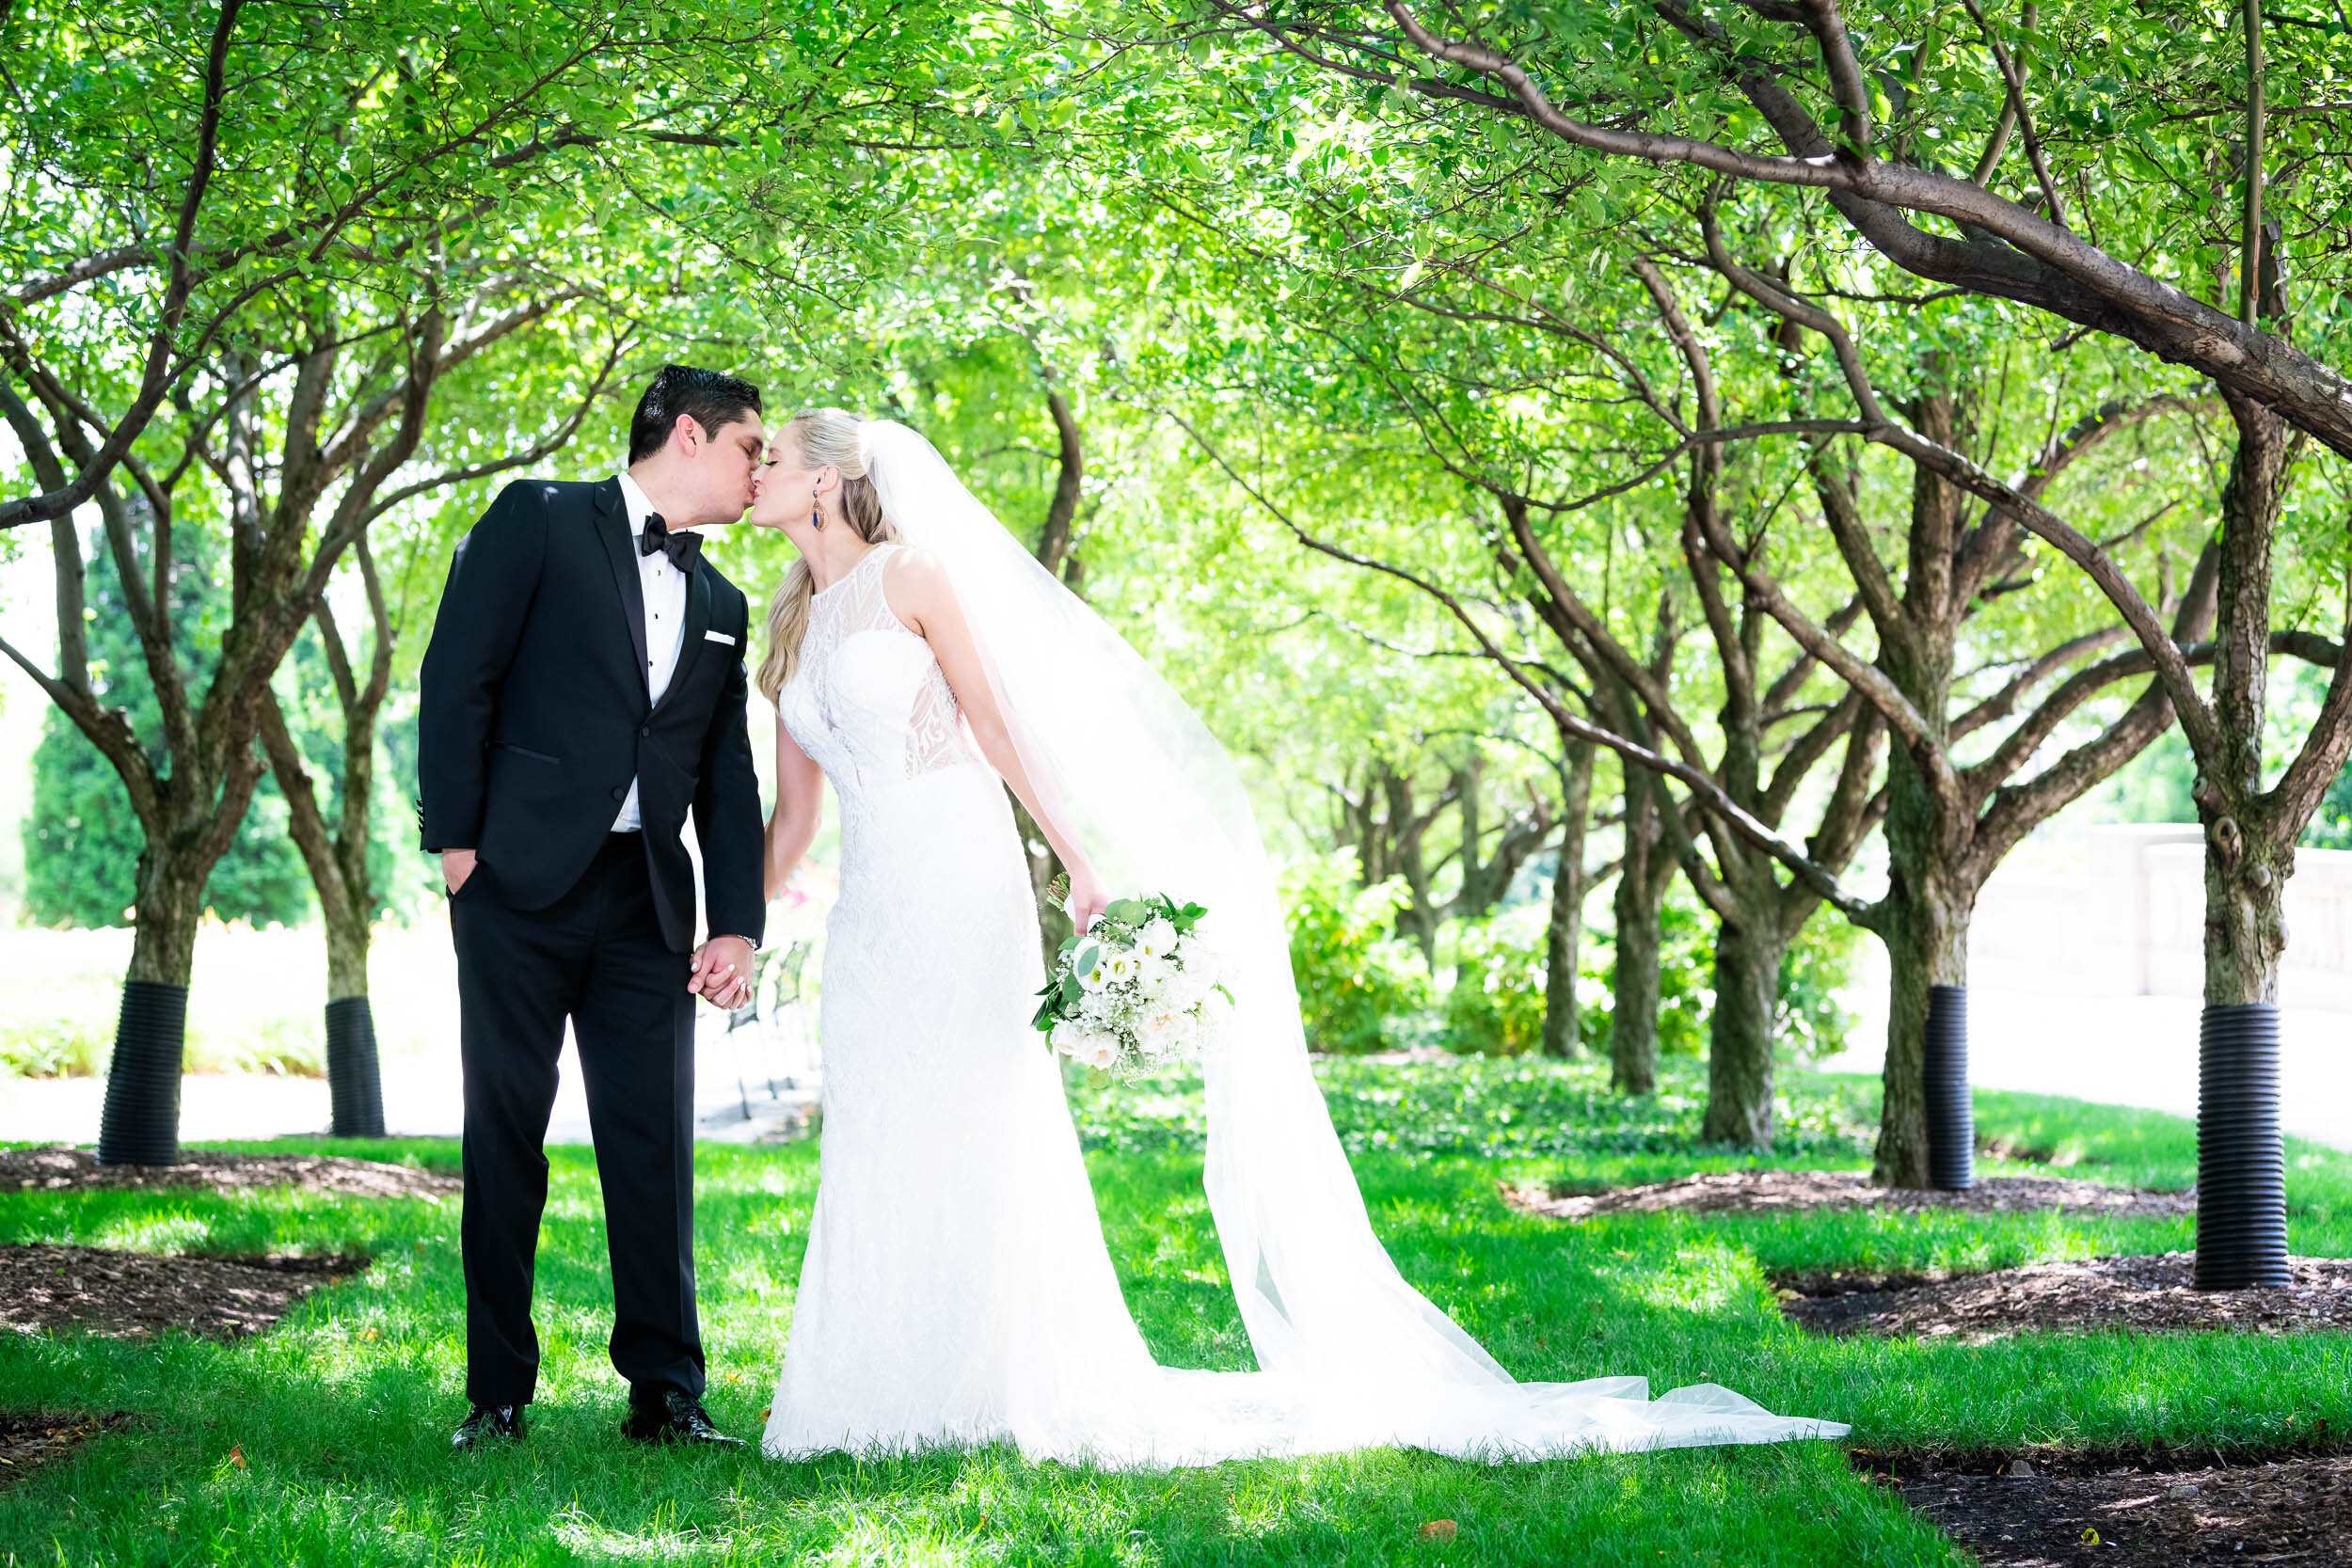 Outdoor wedding portrait: Carnivale Chicago Wedding captured by J. Brown Photography